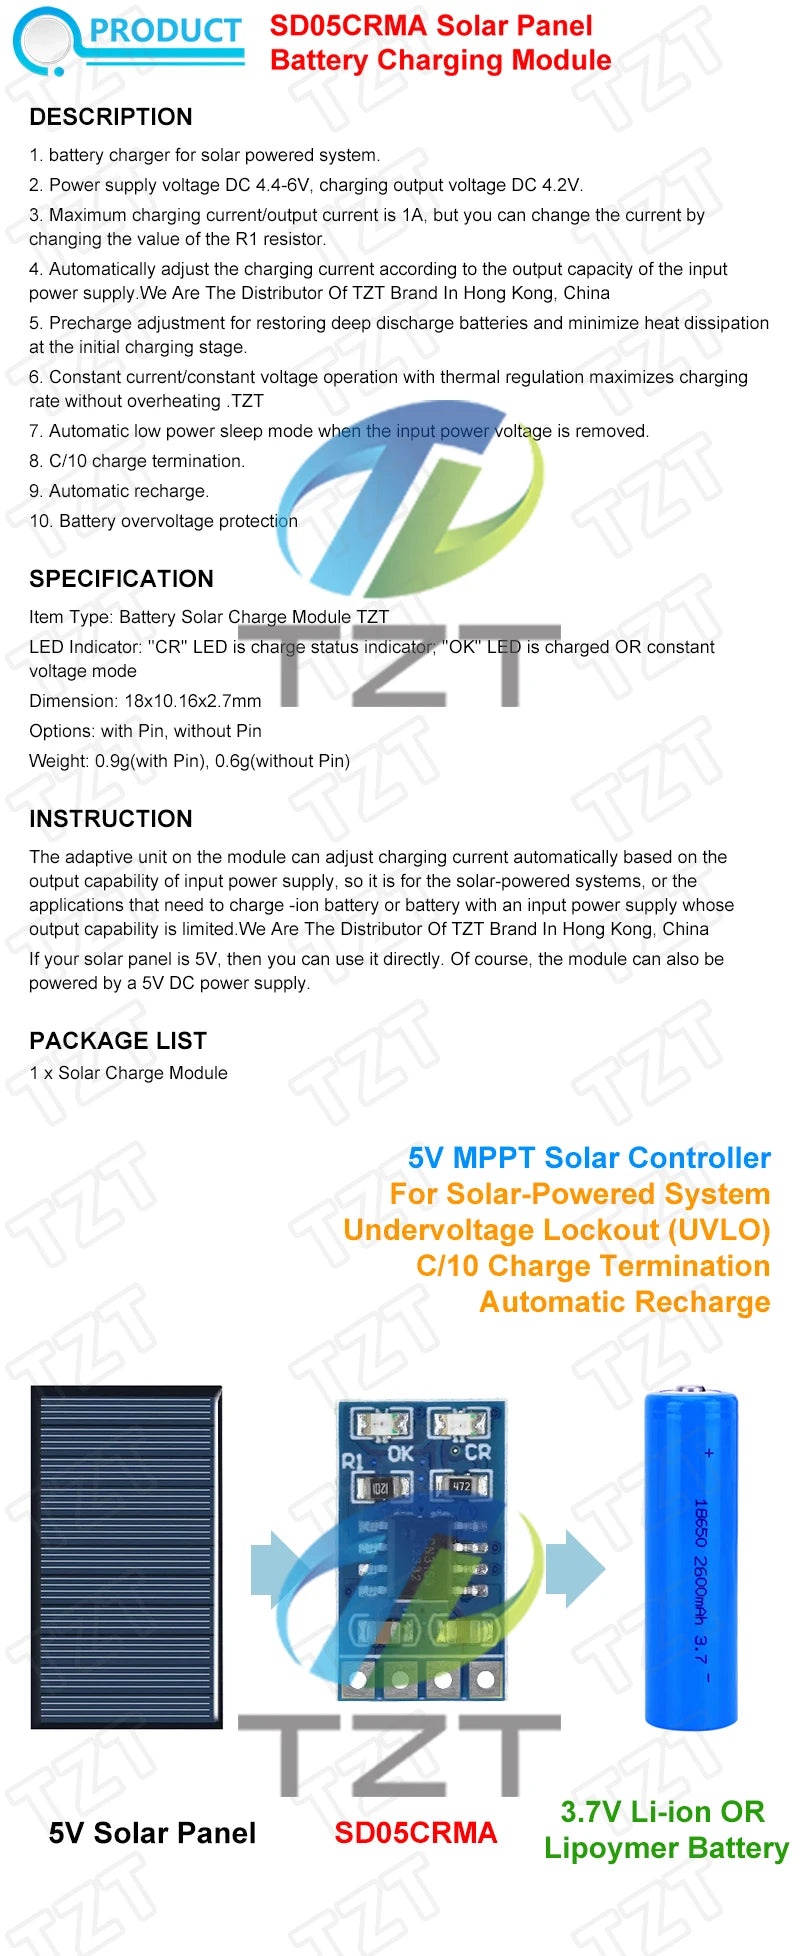 MPPT Solar Charge Controller, Solar charge controller module for charging lithium-ion batteries from solar panels.